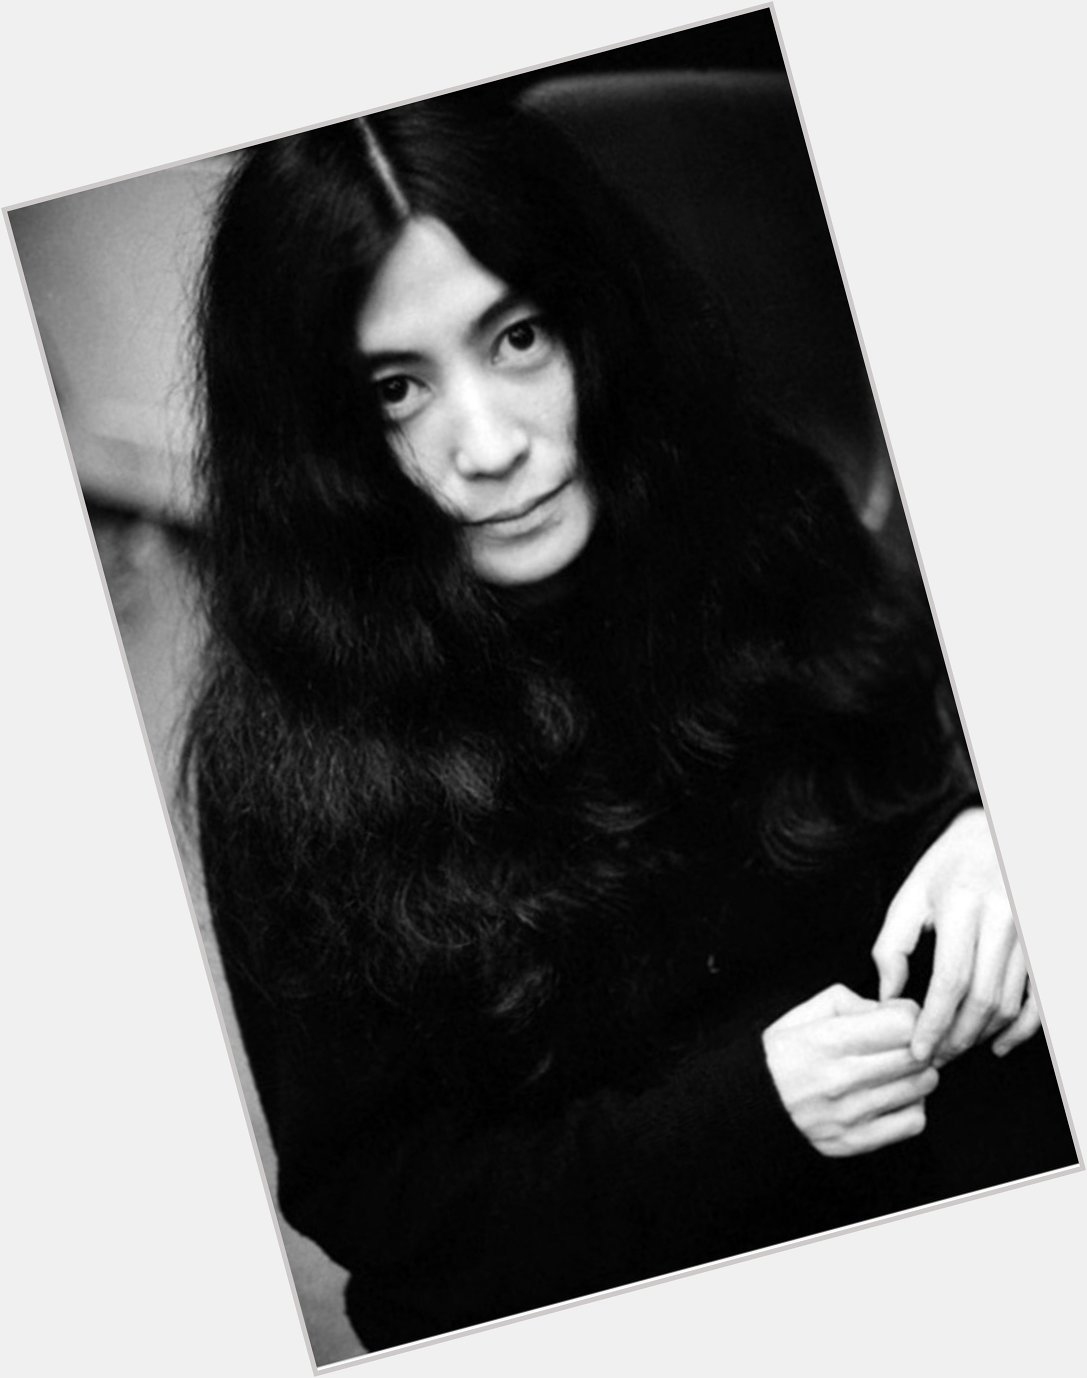 On this day in Pop!
Yoko Ono was born (18/02/1933)
Happy Birthday to you!  